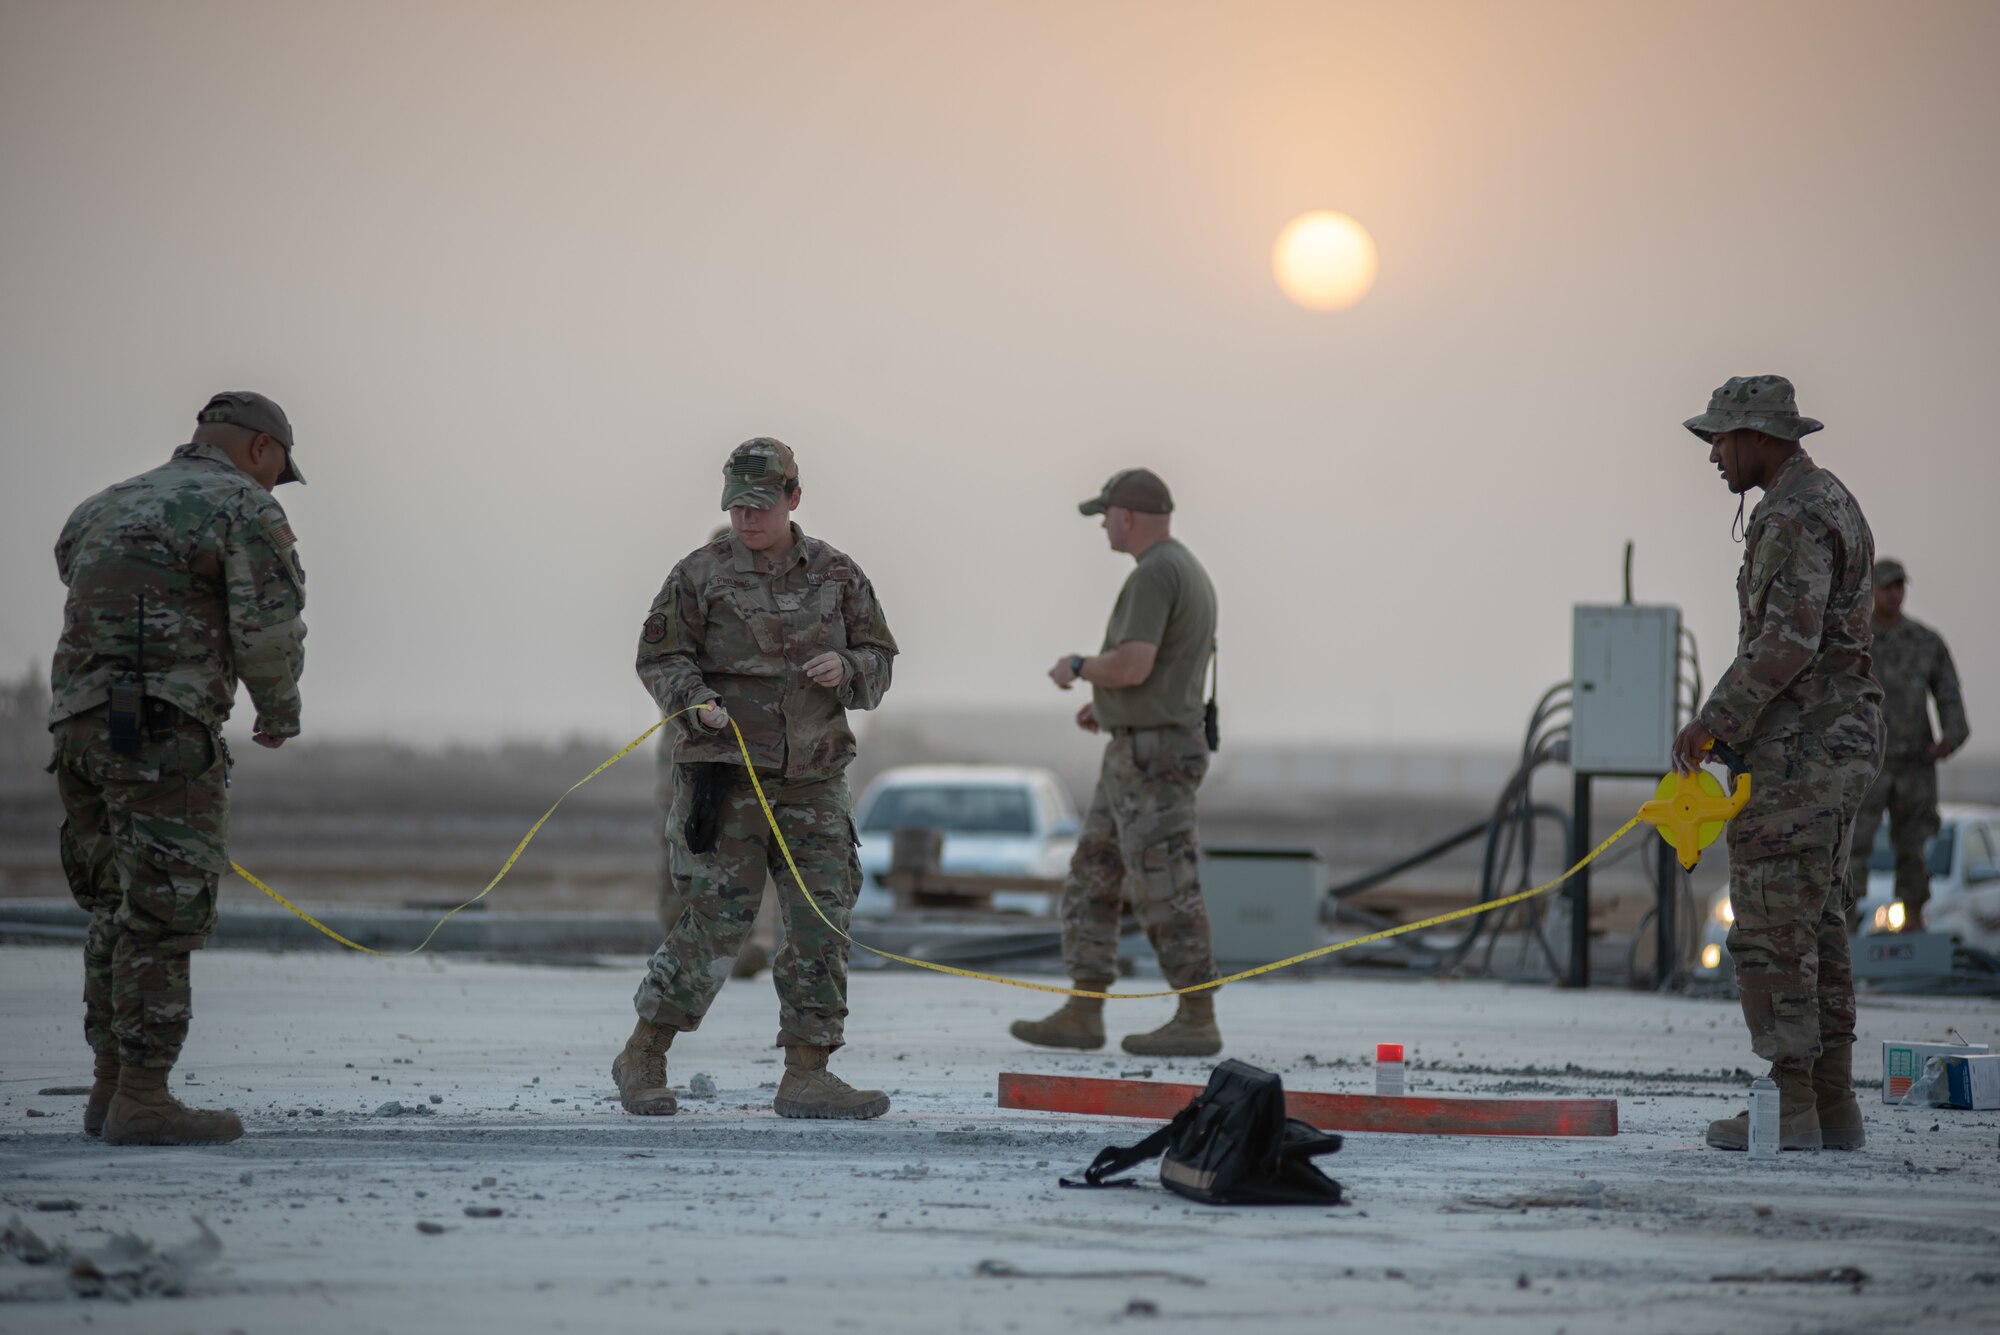 Three 380th Expeditionary Civil Engineer Squadron water and fuels technicians mark damaged areas during a rapid airfield damage repair exercise July 26, 2019, at Al Dhafra Air Base, United Arab Emirates. The concrete was then broken up and removed. (U.S. Air Force photo by Staff Sgt. Chris Thornbury)